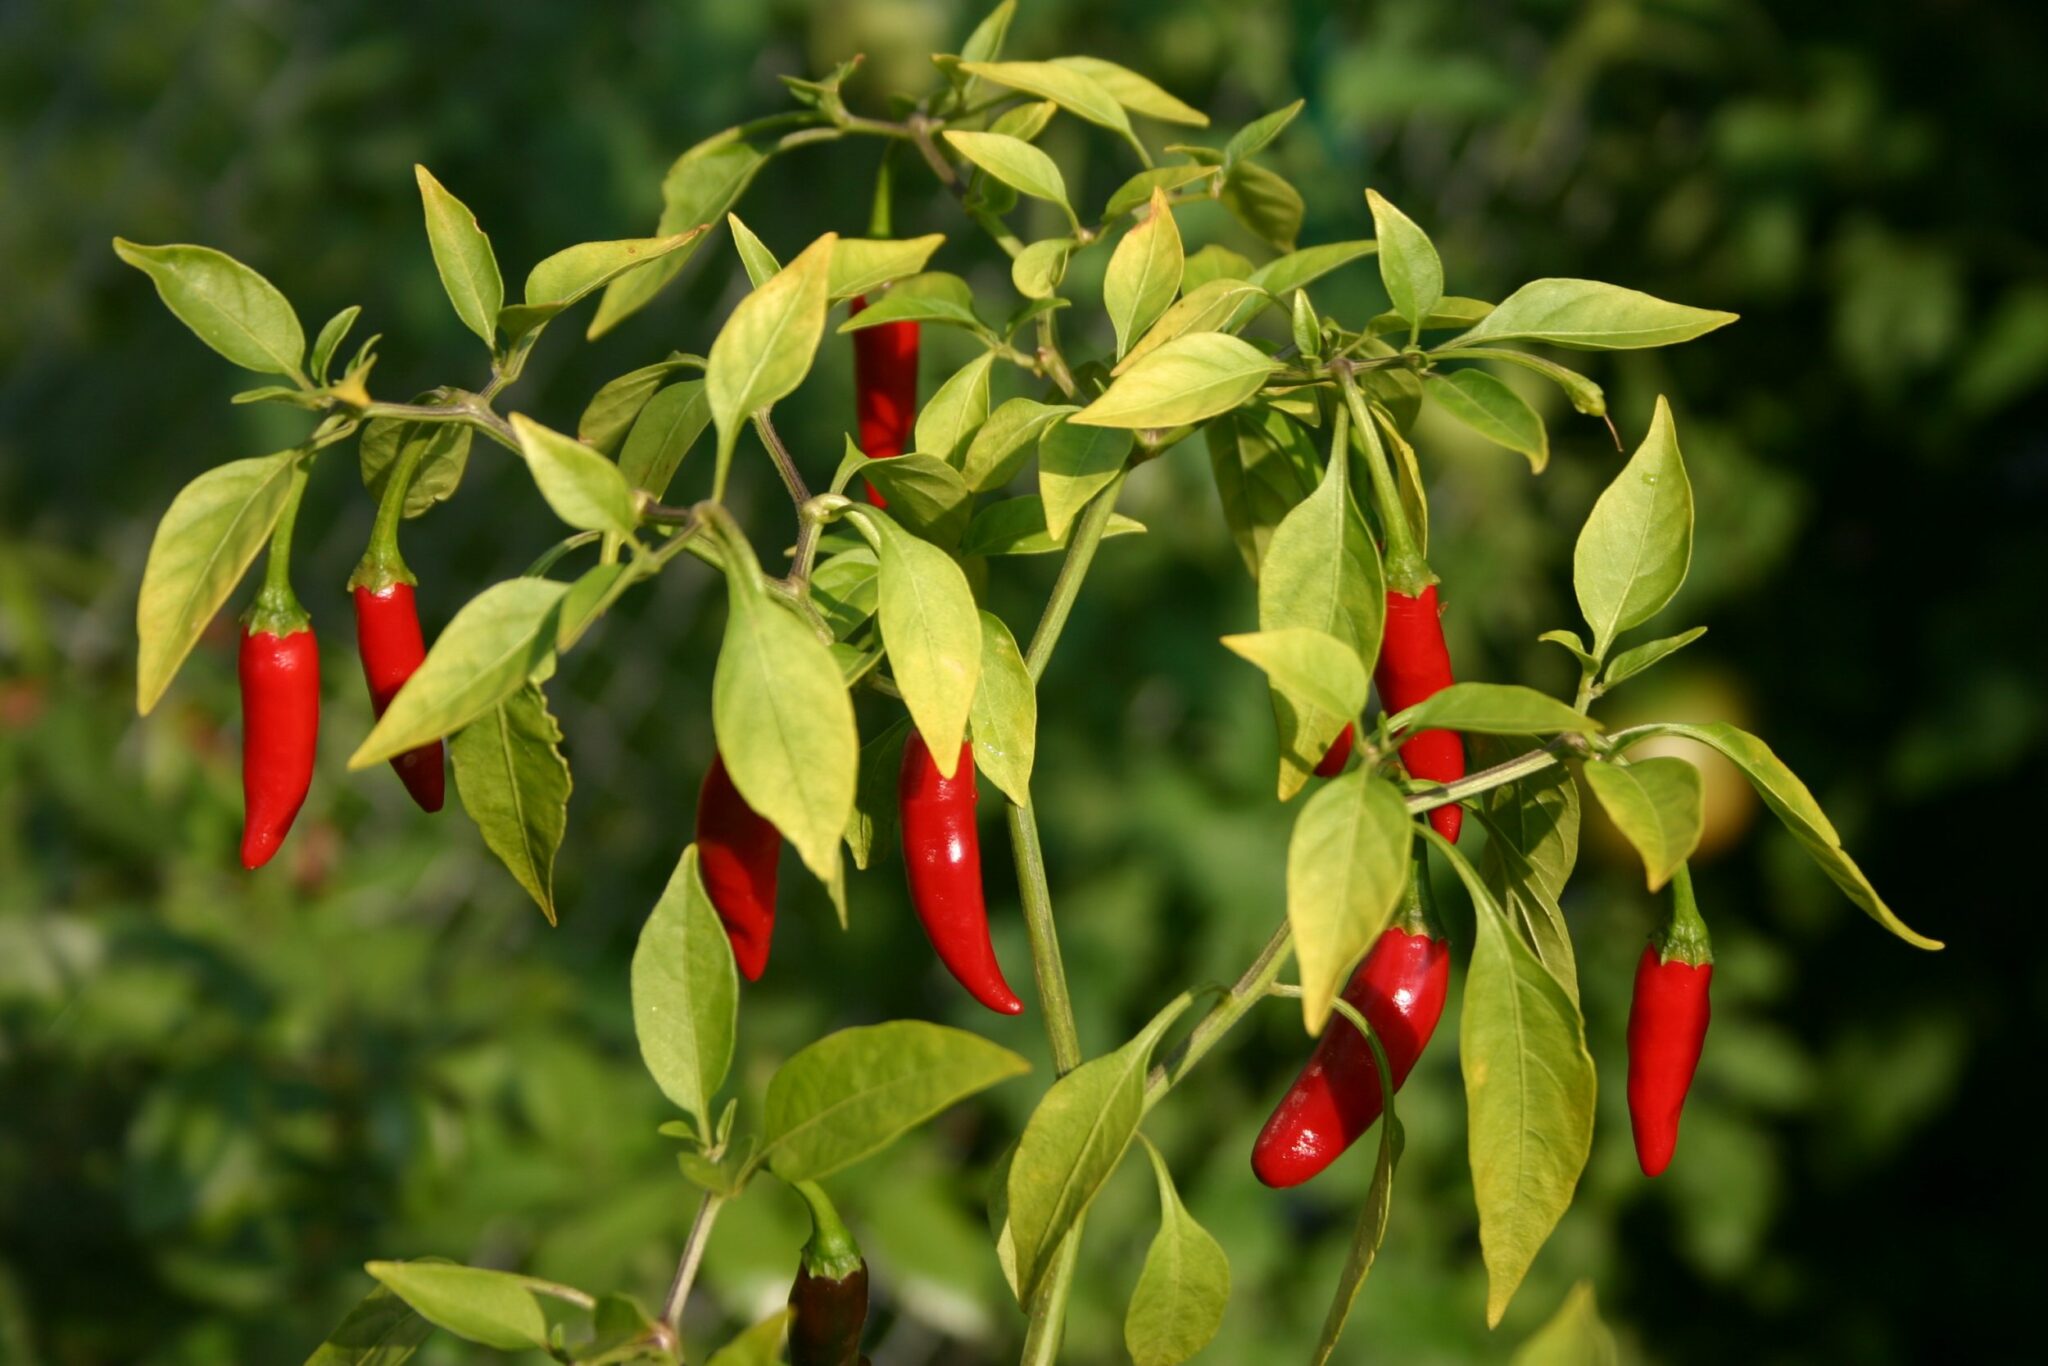 how do some insects eat cayenne pepper without suffering the heat